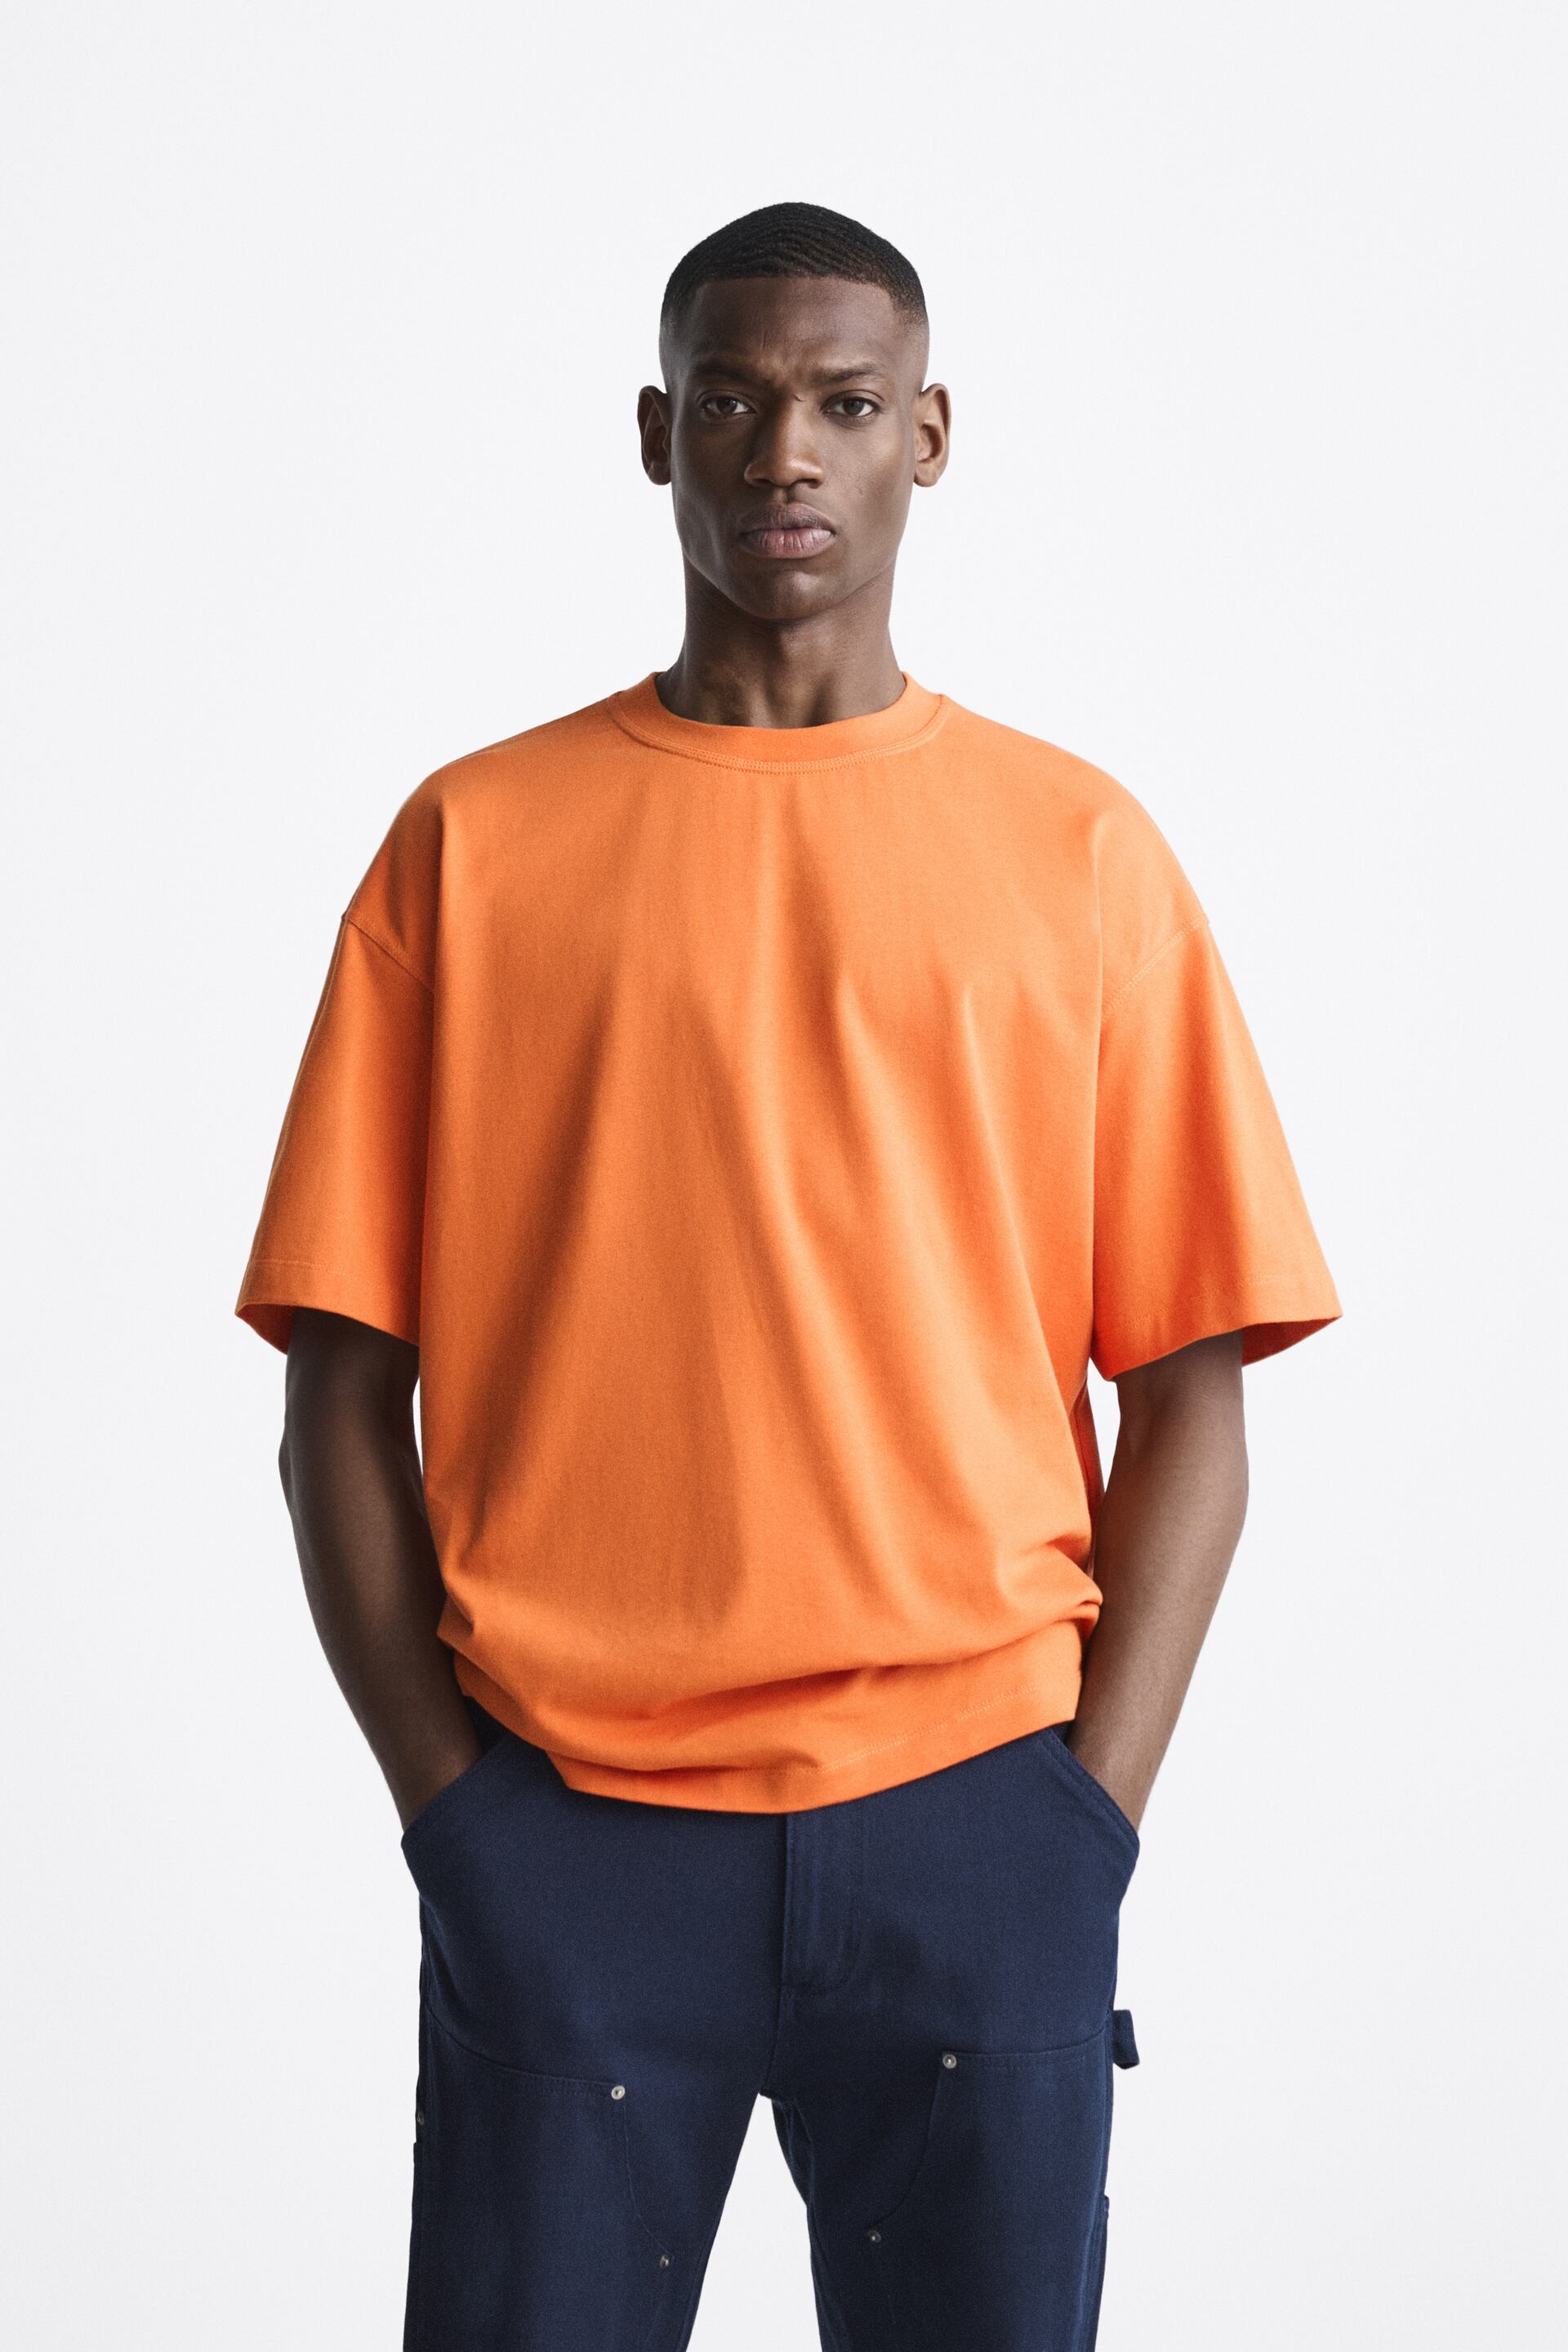 The city art Bargain RELAXED FIT T-SHIRT - Tangerine | ZARA United States